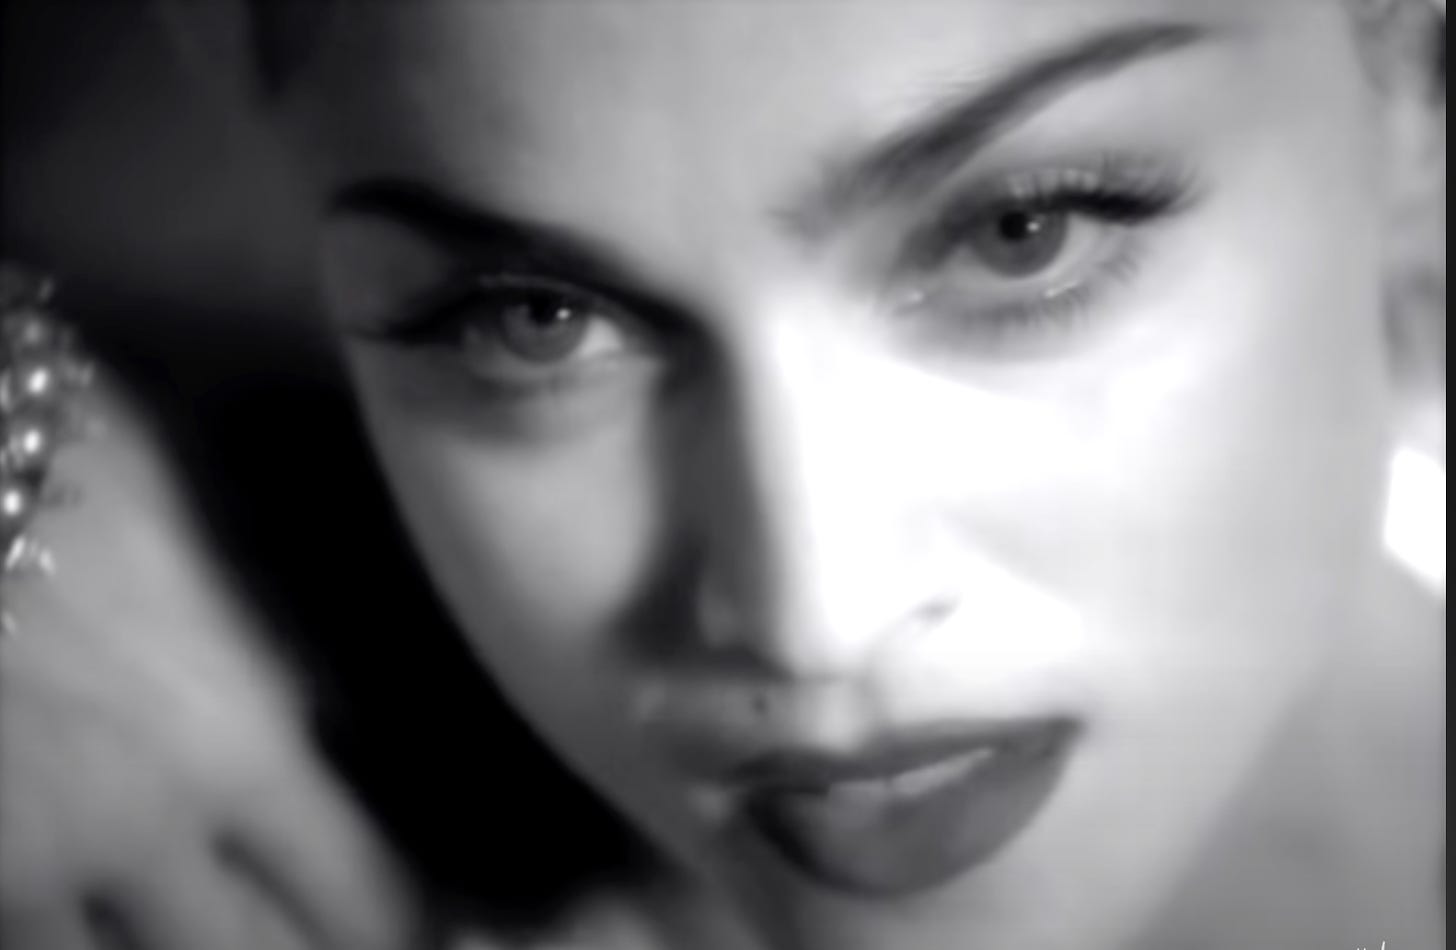 A closeup of madonna's face while she is rapping in Vogue